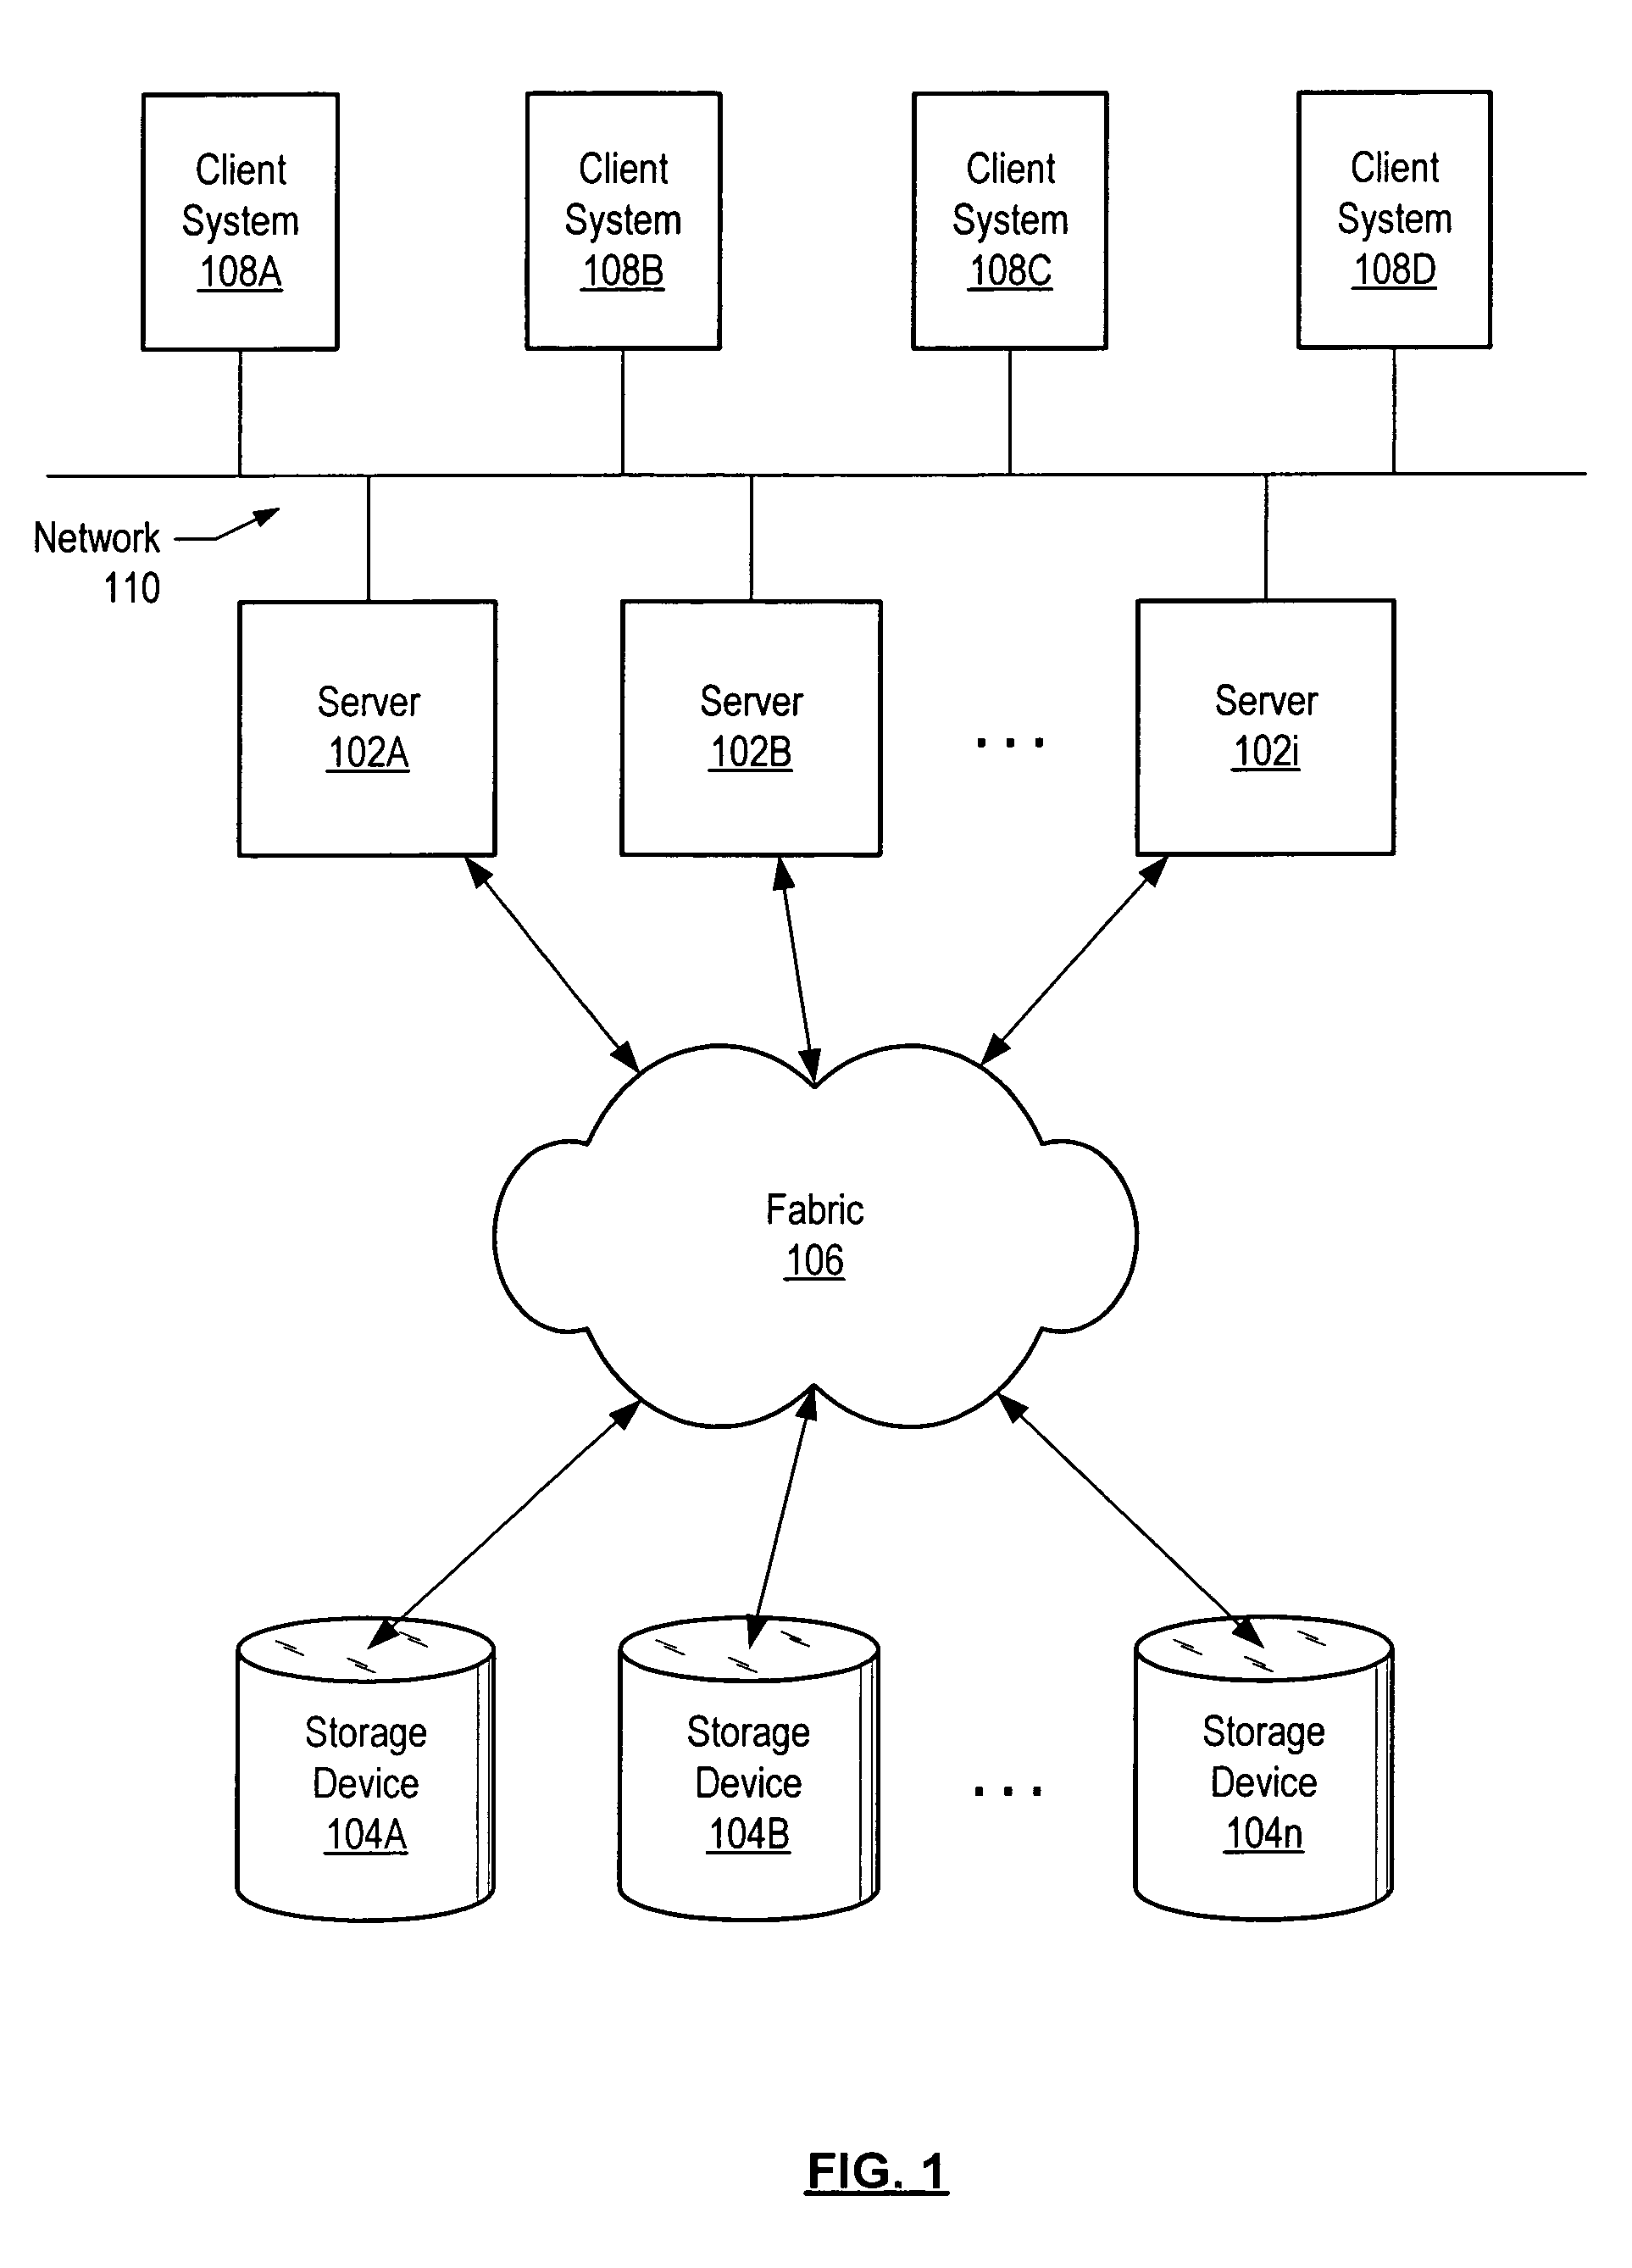 Graphical analysis of states in a computing system